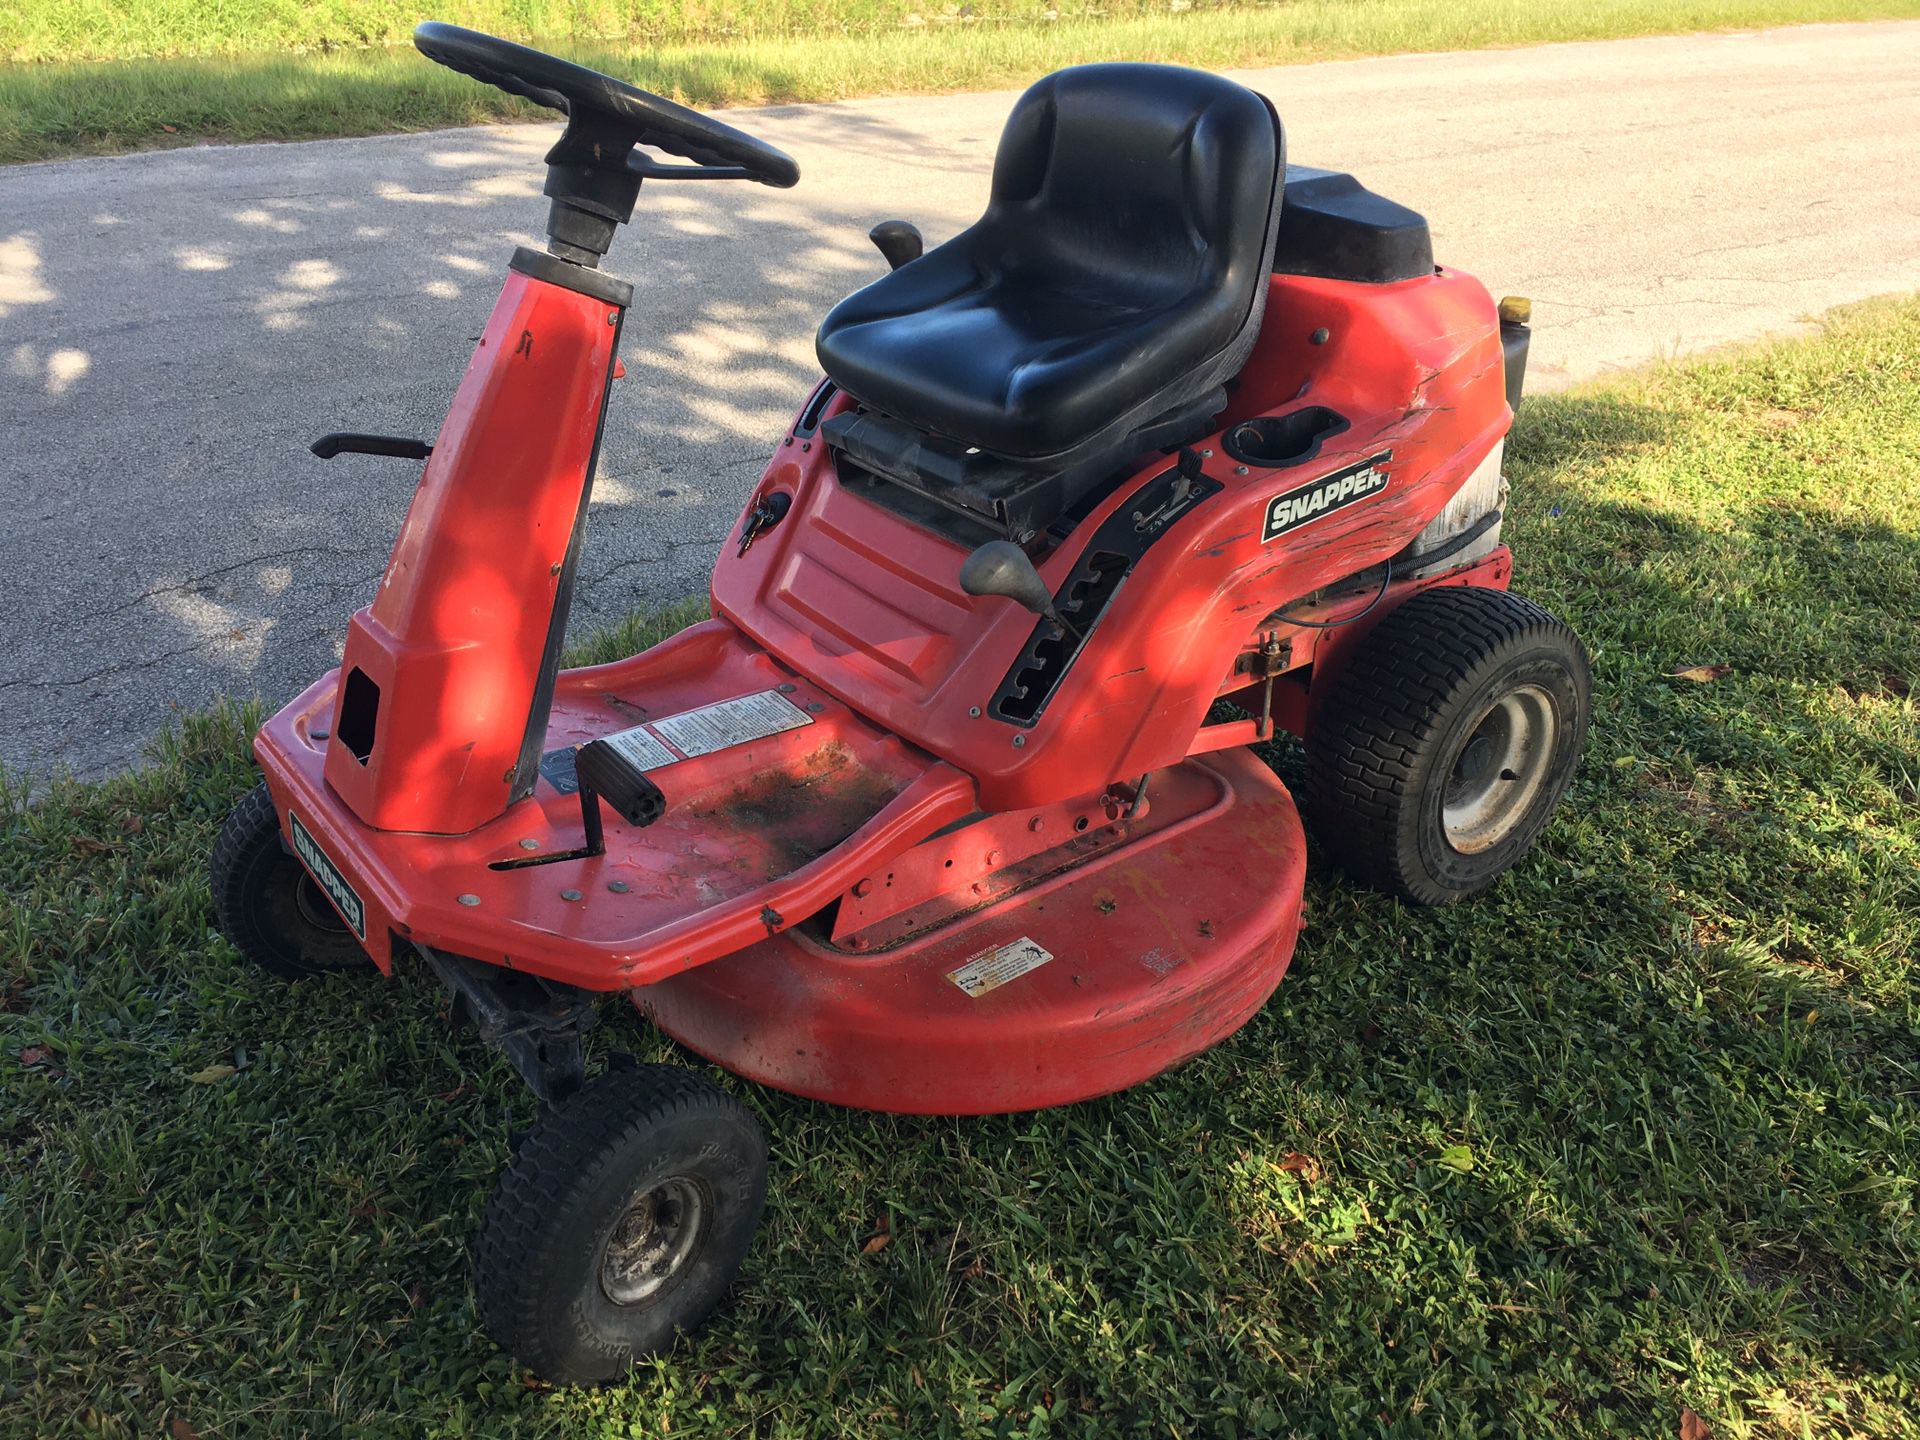 12.5 Classic Snapper tractor 33 inch Riding Lawn Mower